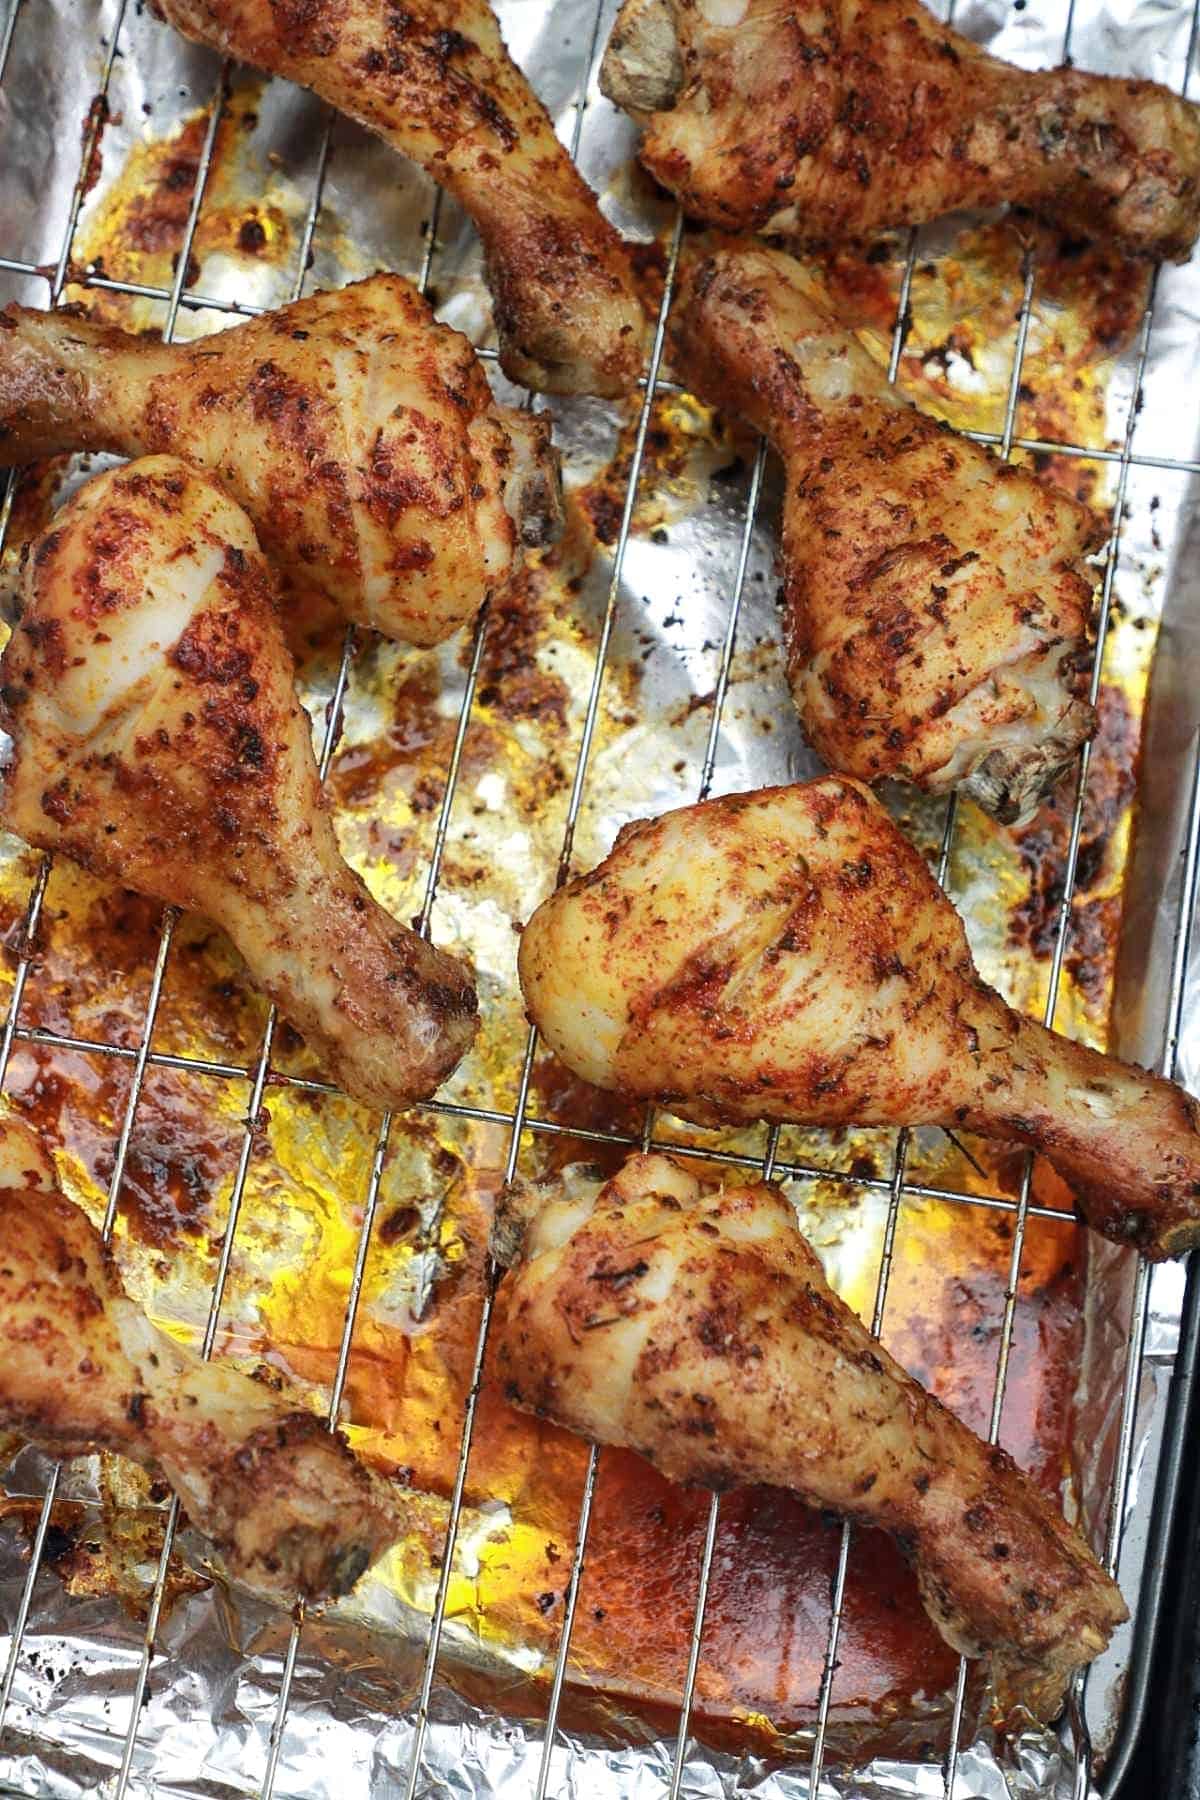 baked chicken drumsticks on baking rack covered tray.